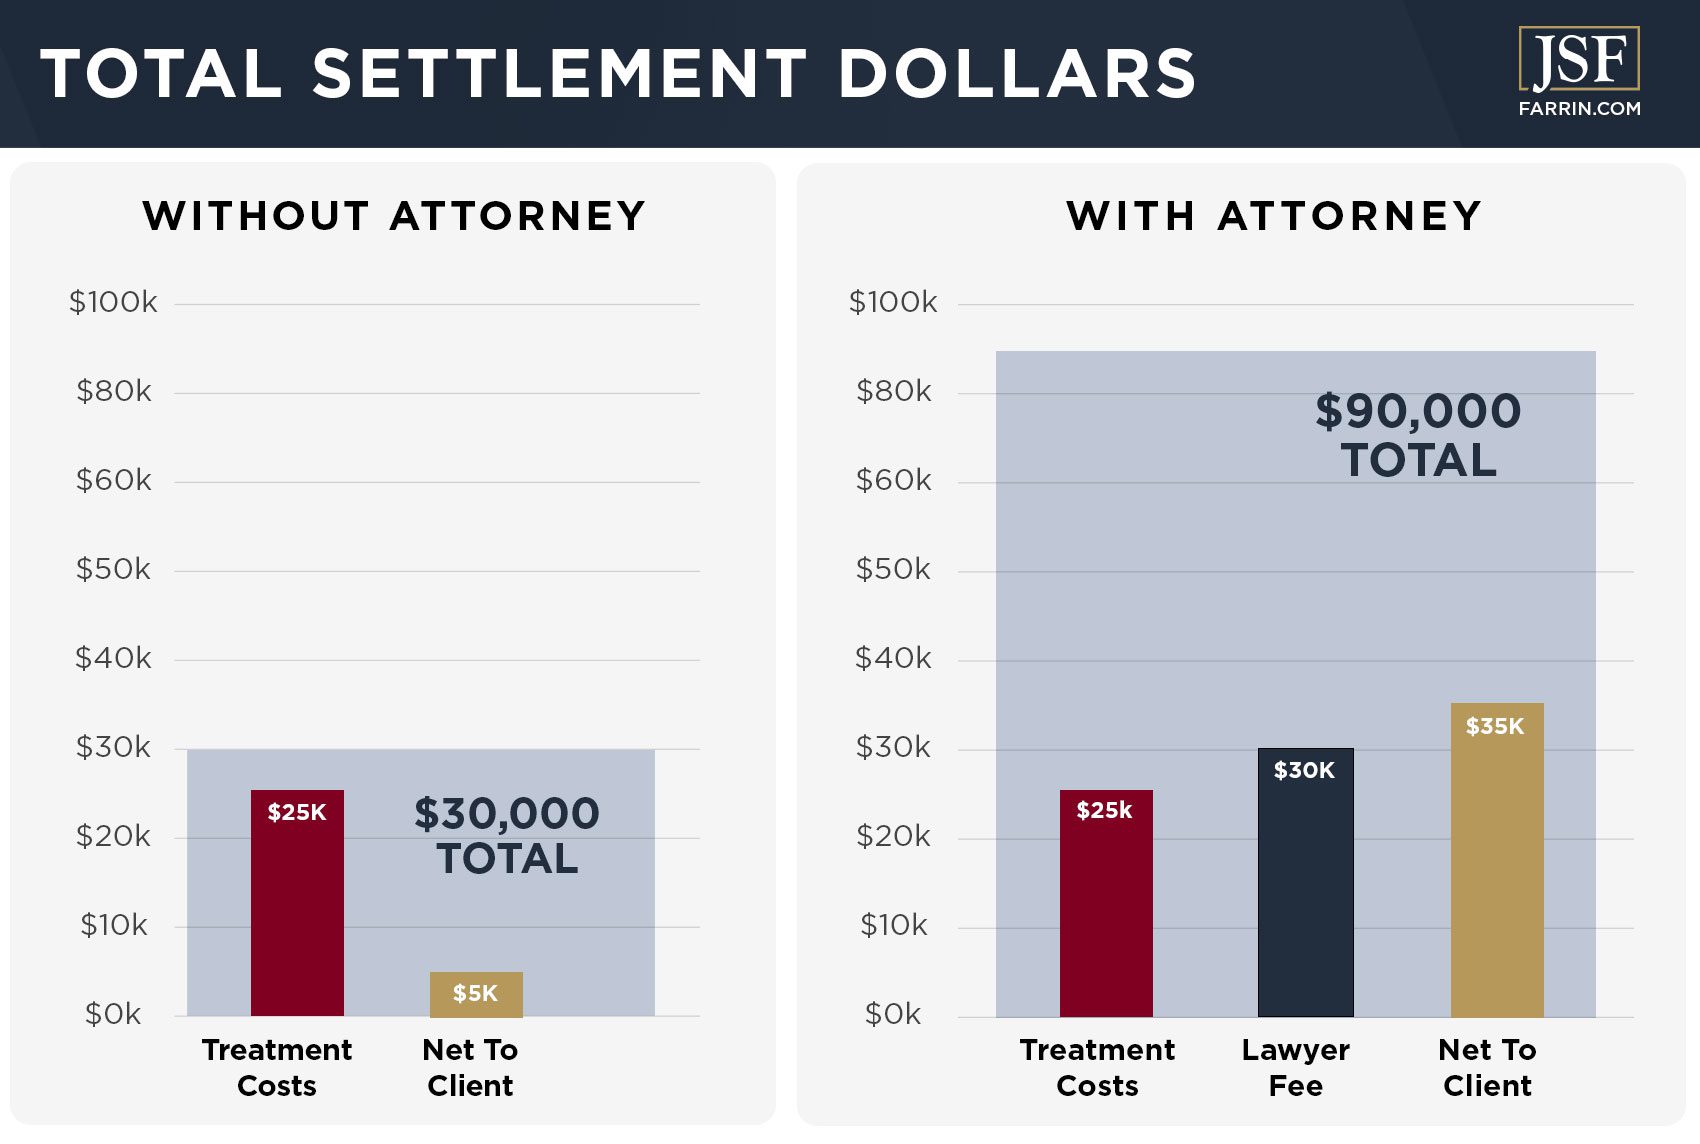 Even with a lawyer fee, having an attorney led to a higher settlement & net outcome for the client.